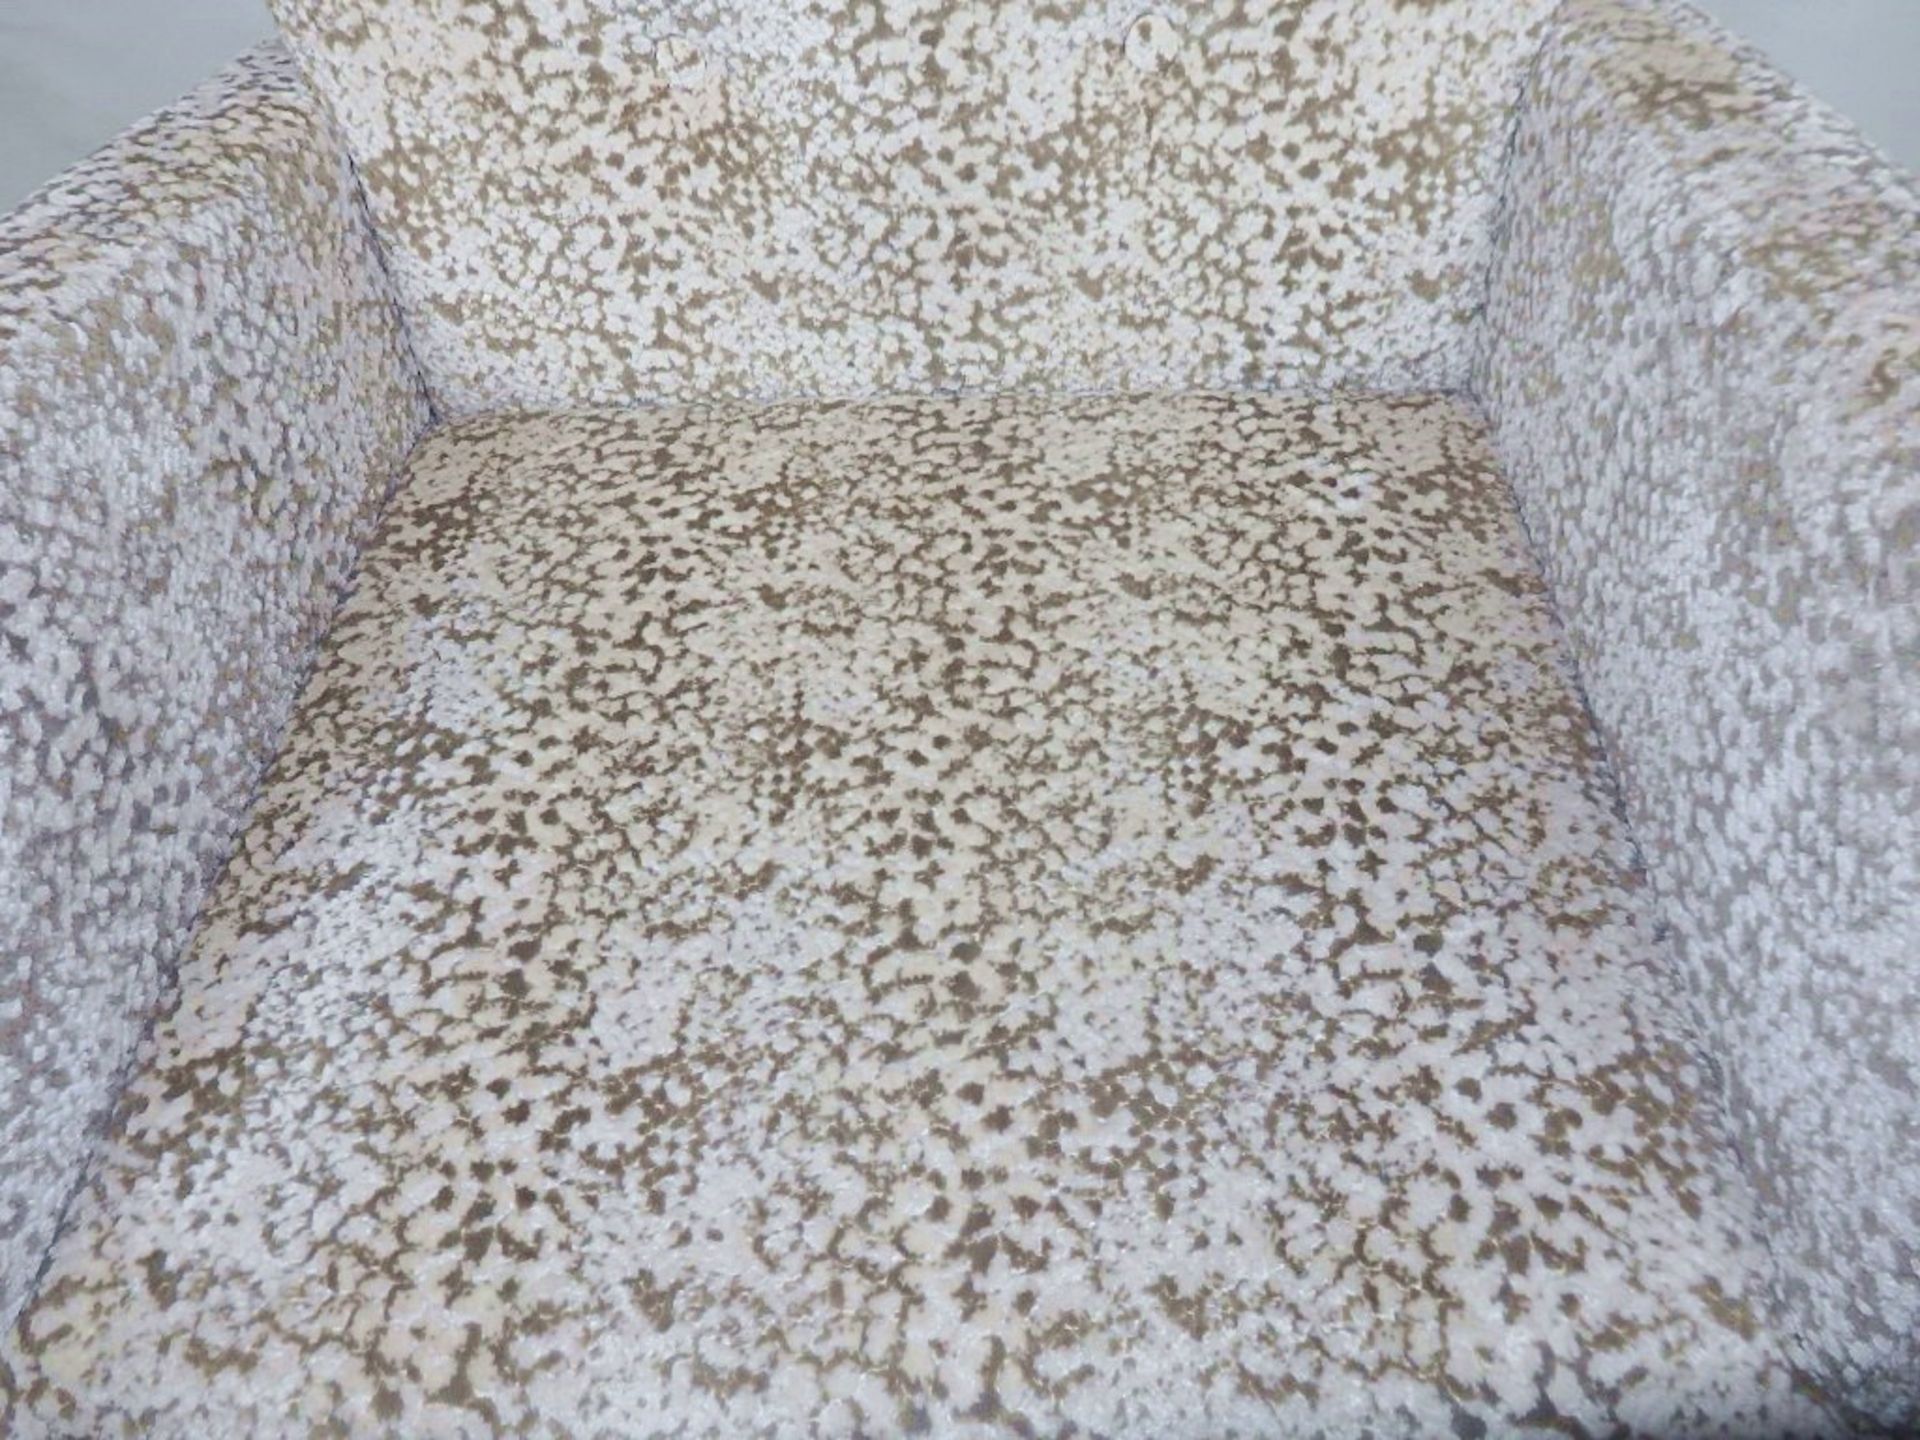 1 x Small Bespoke Swivel Chair - Upholstered In A Rich Mottled Chenille - Dimensions: W x H x D cm - - Image 5 of 5